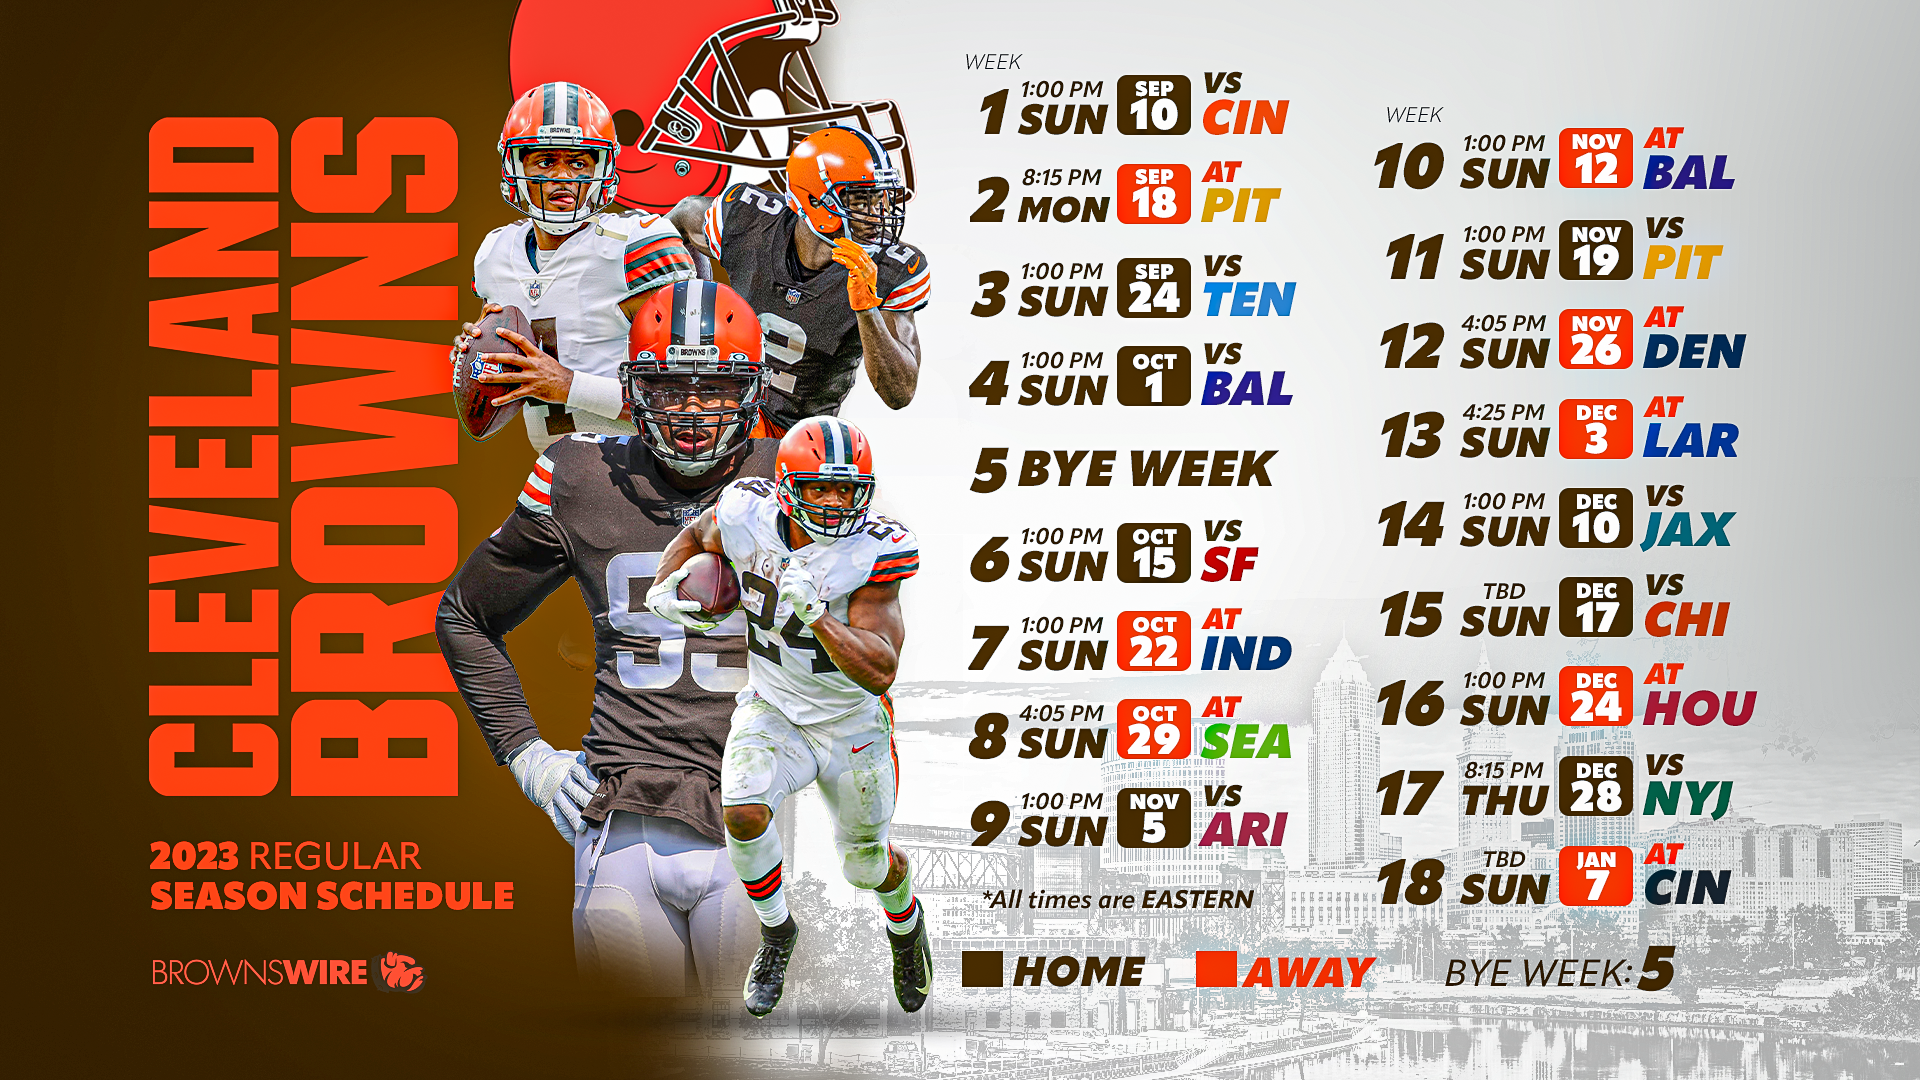 Browns: The 2023 schedule has arrived